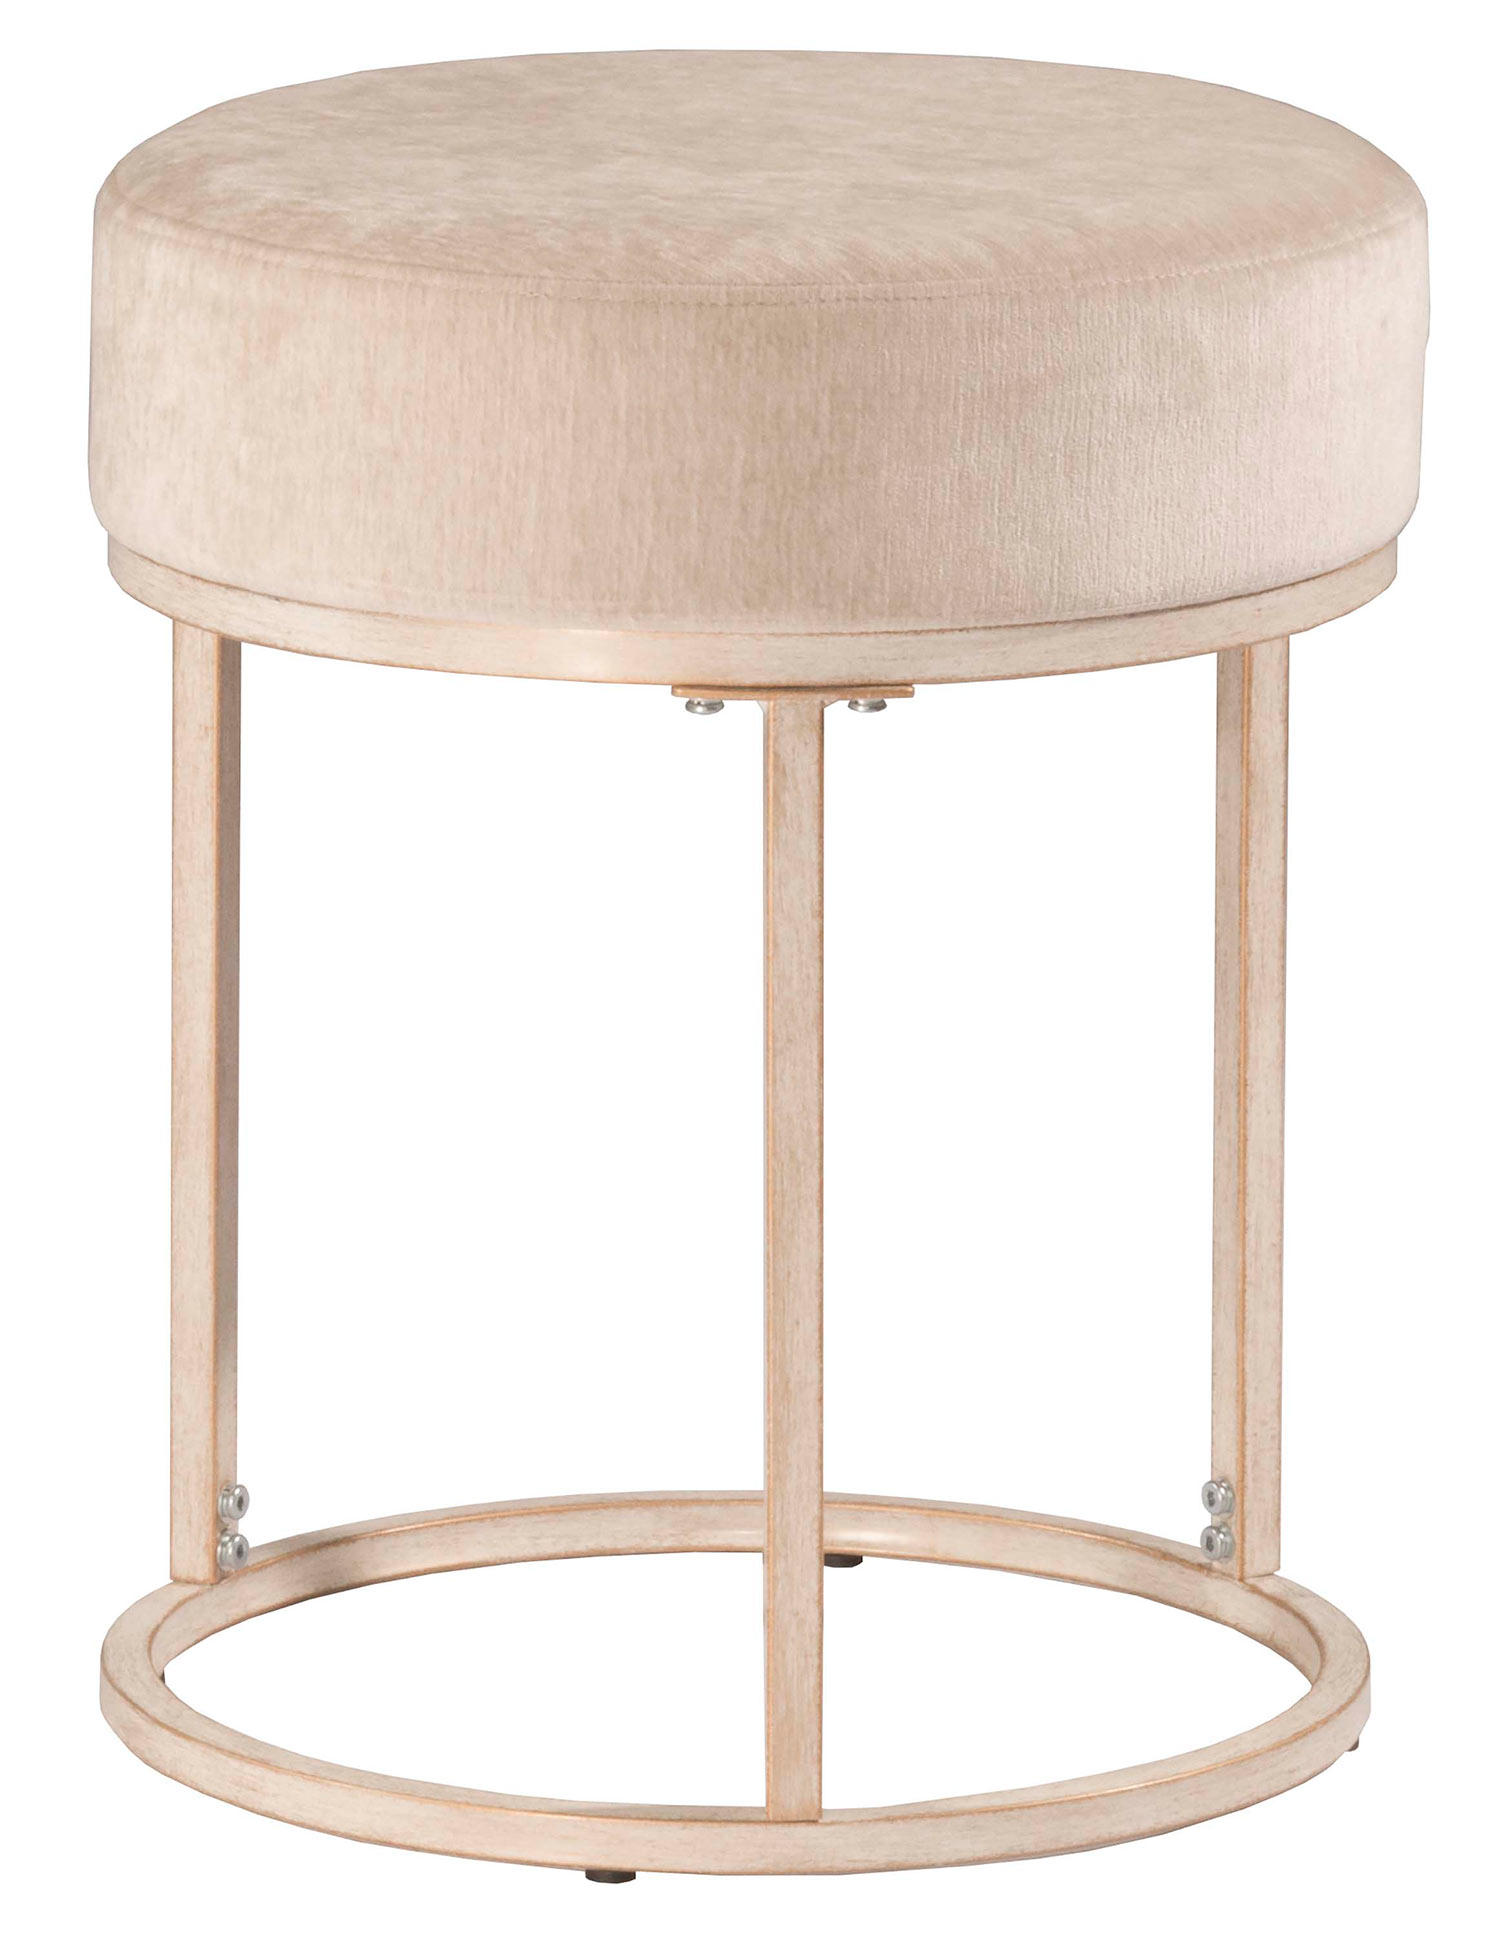 Hillsdale Swanson Backless Upholstered and Metal Vanity Stool - Distressed White